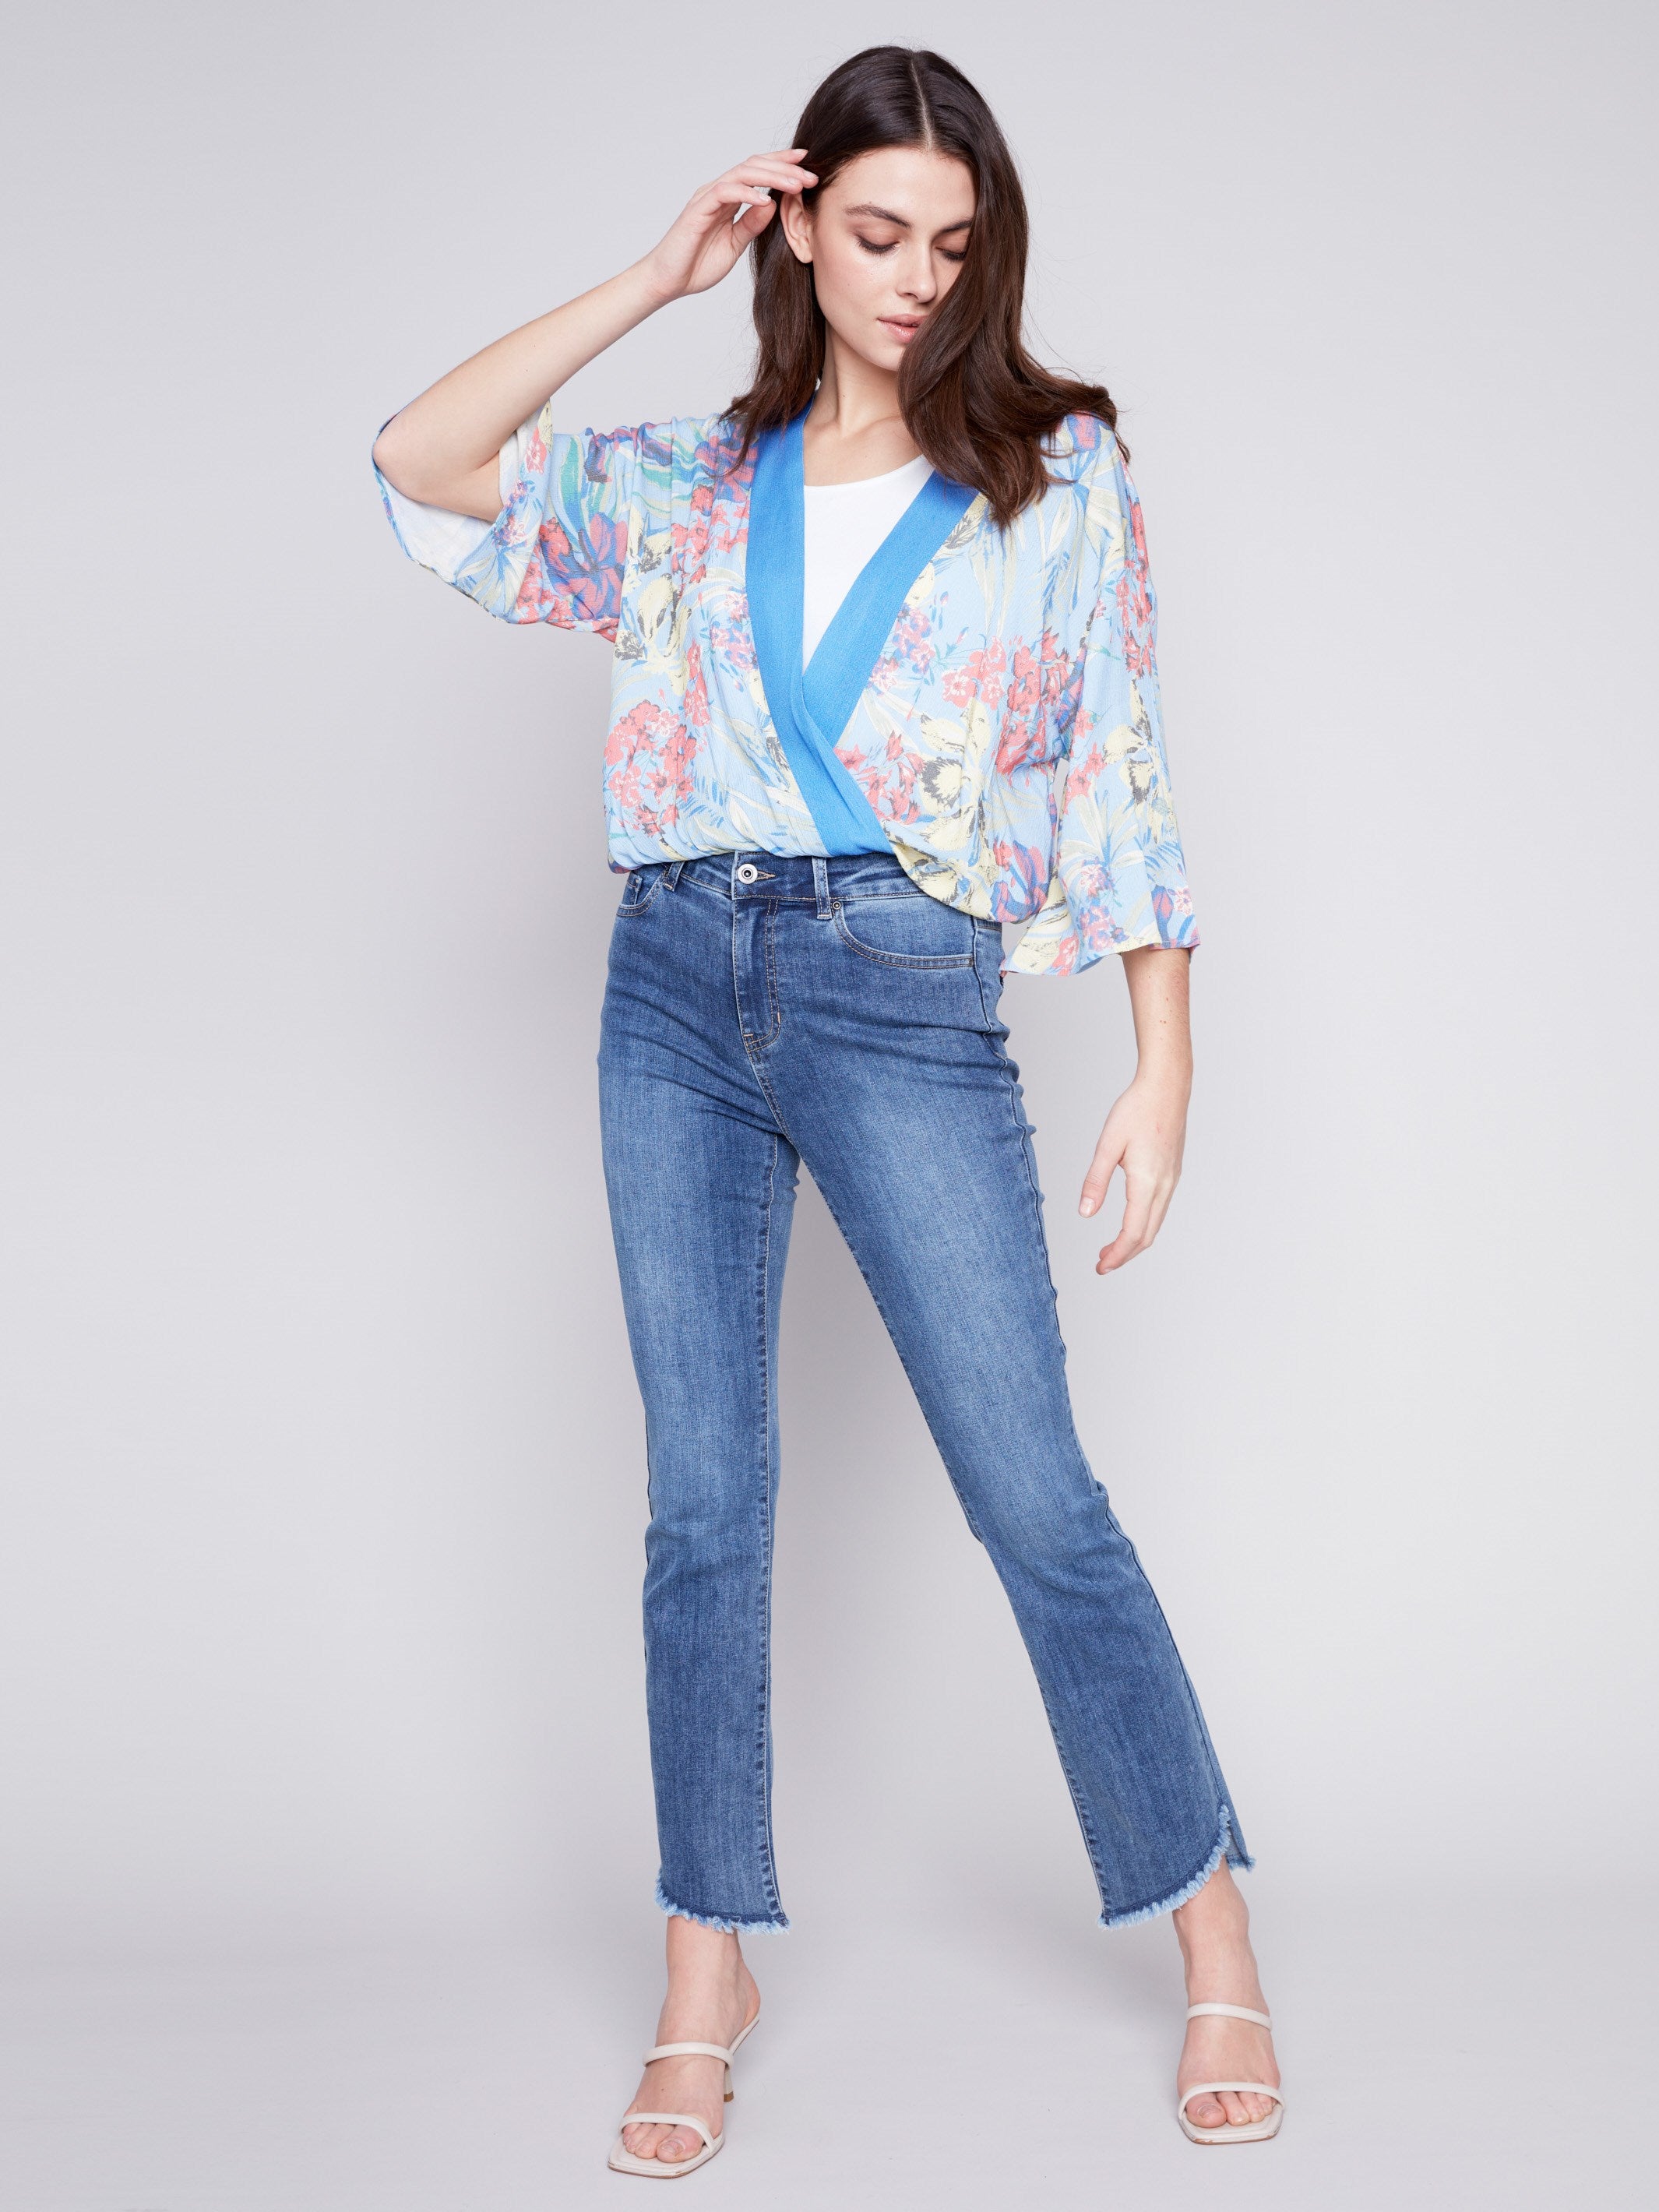 Printed Overlap Blouse - Lillypad - Charlie B Collection Canada - Image 2